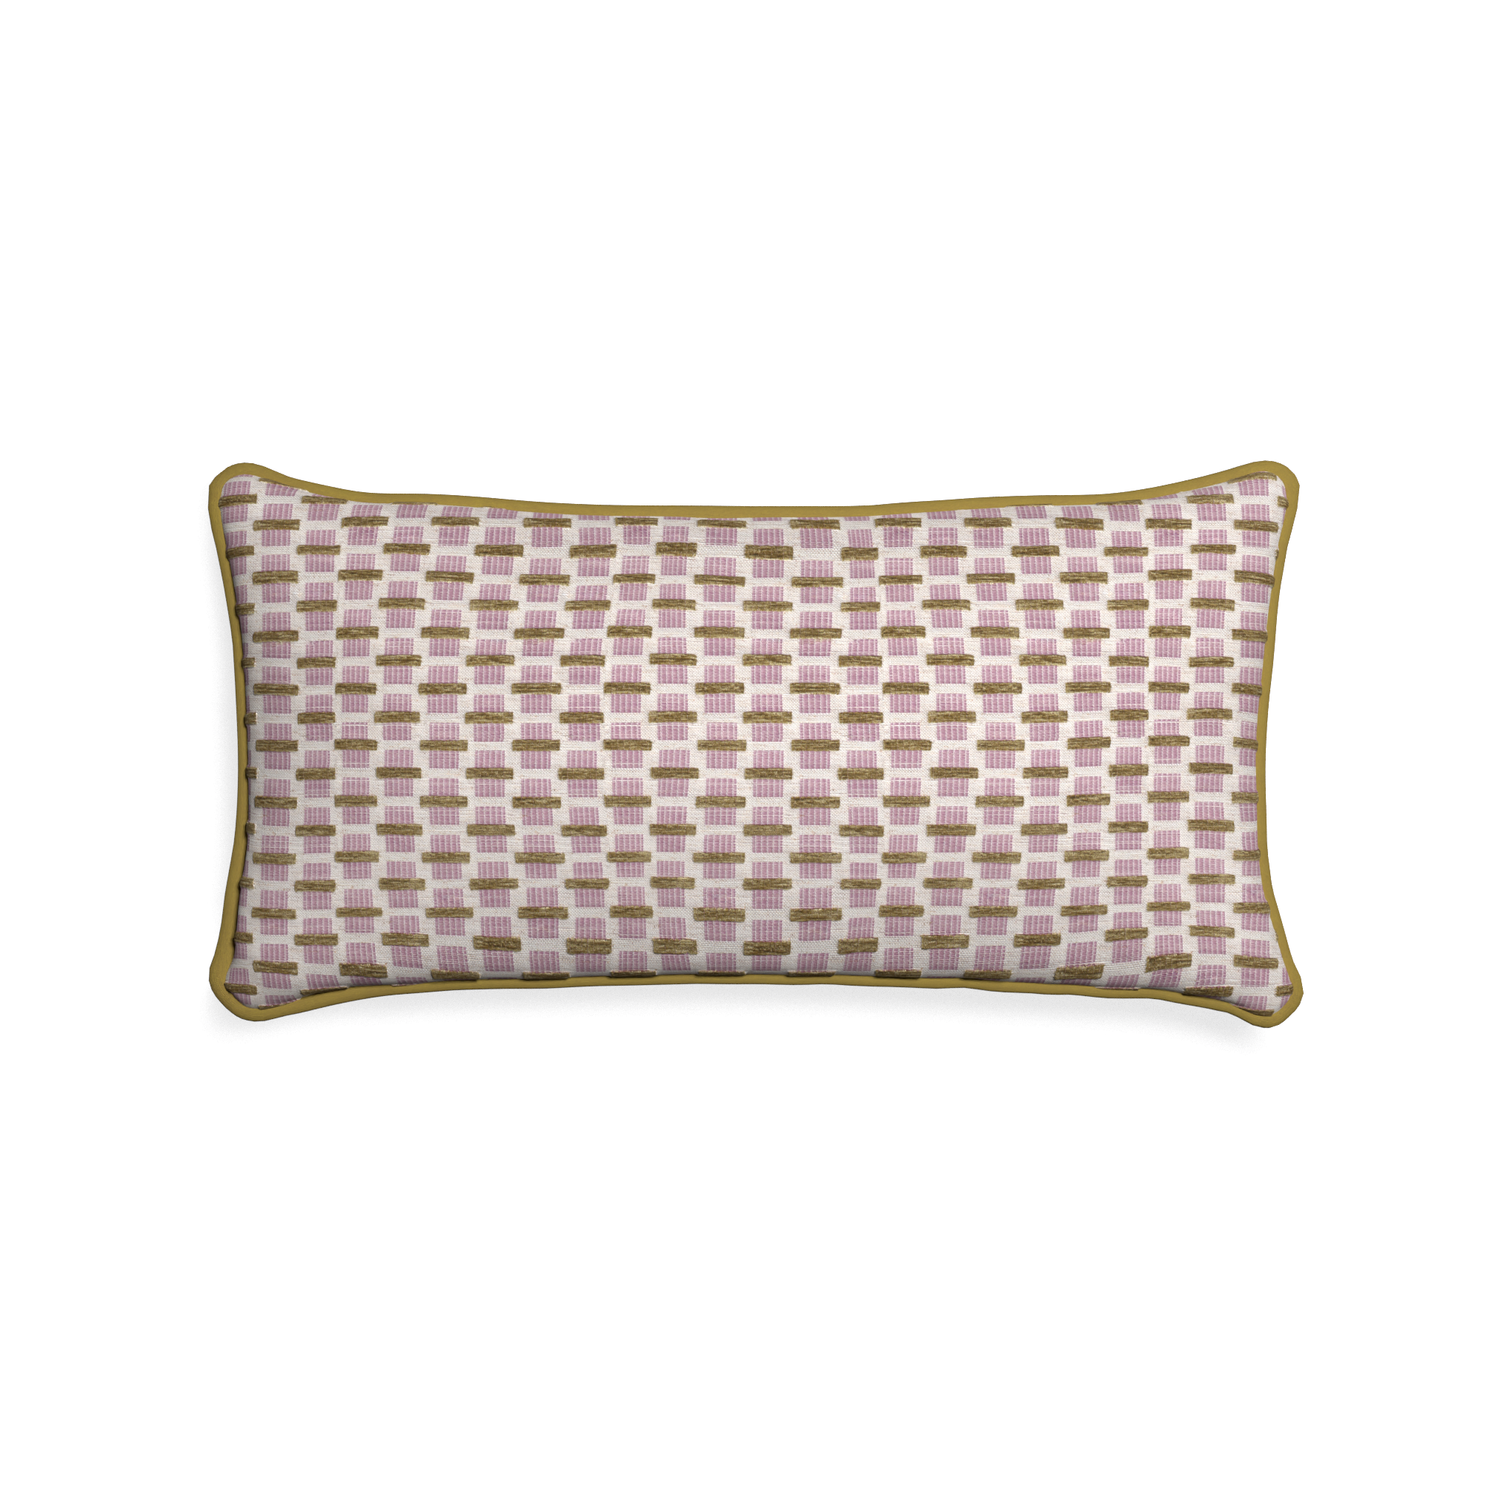 Midi-lumbar willow orchid custom pink geometric chenillepillow with c piping on white background